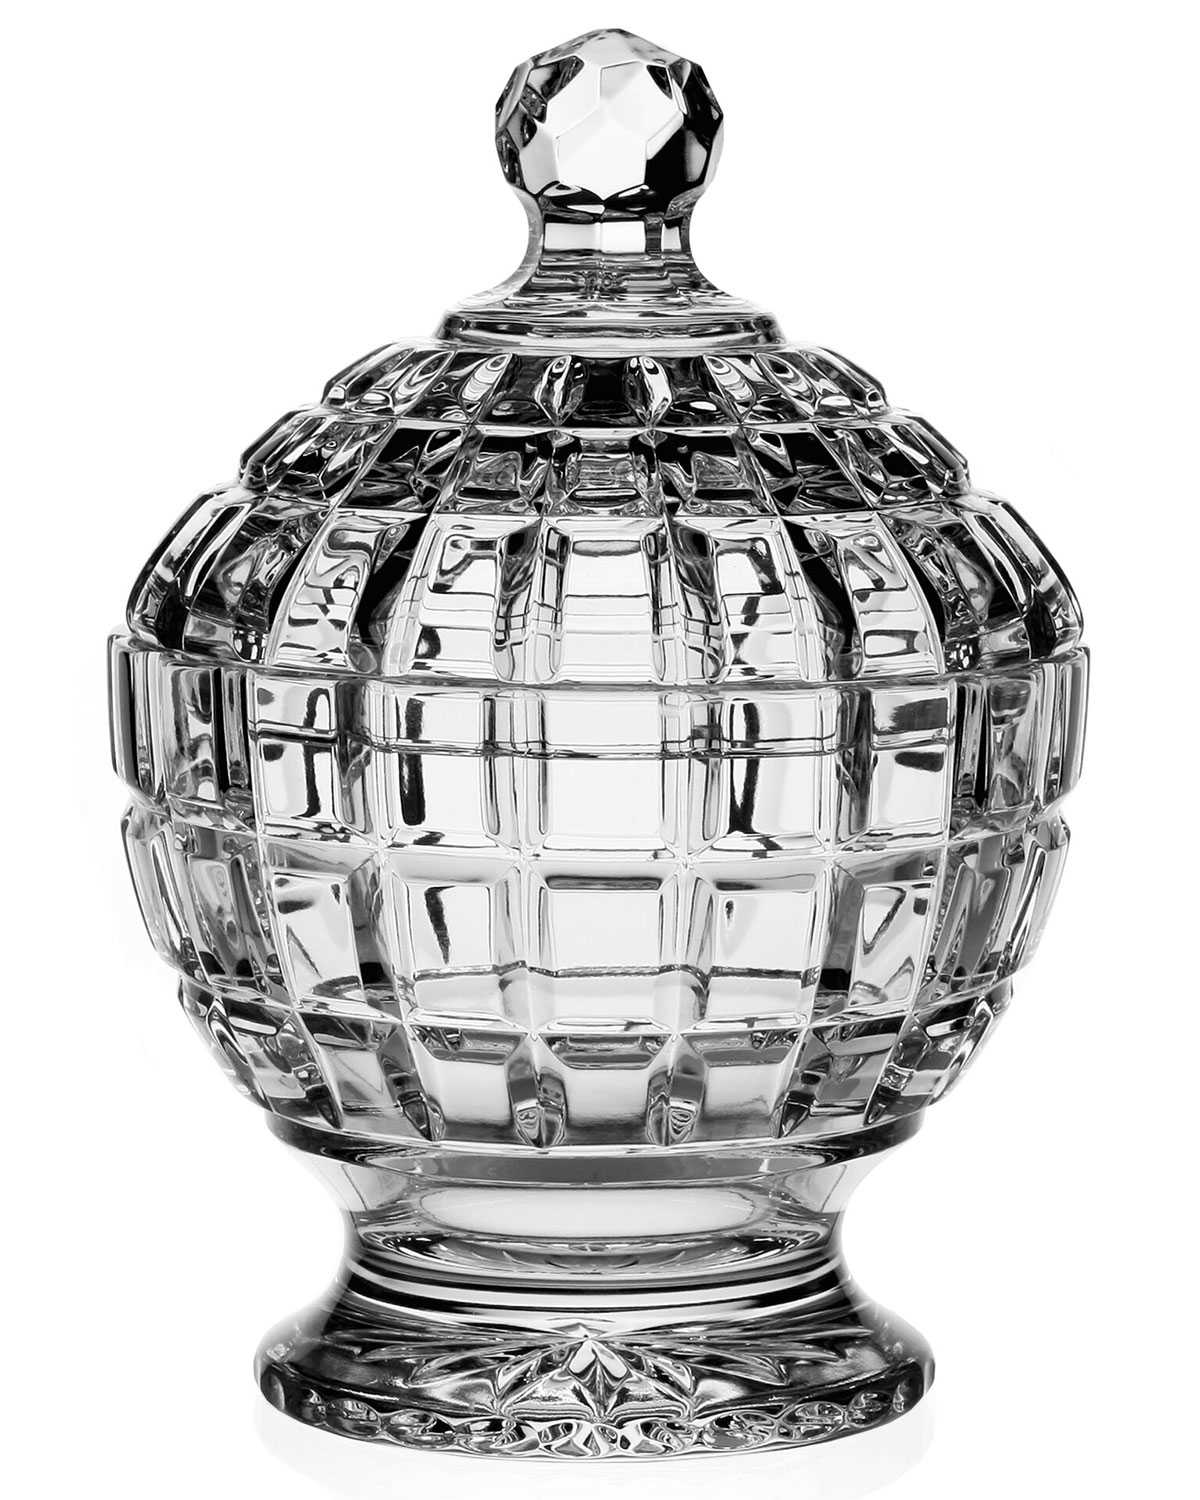 Handcut crystal bonbonniere with a lid is a Georgian reproduction